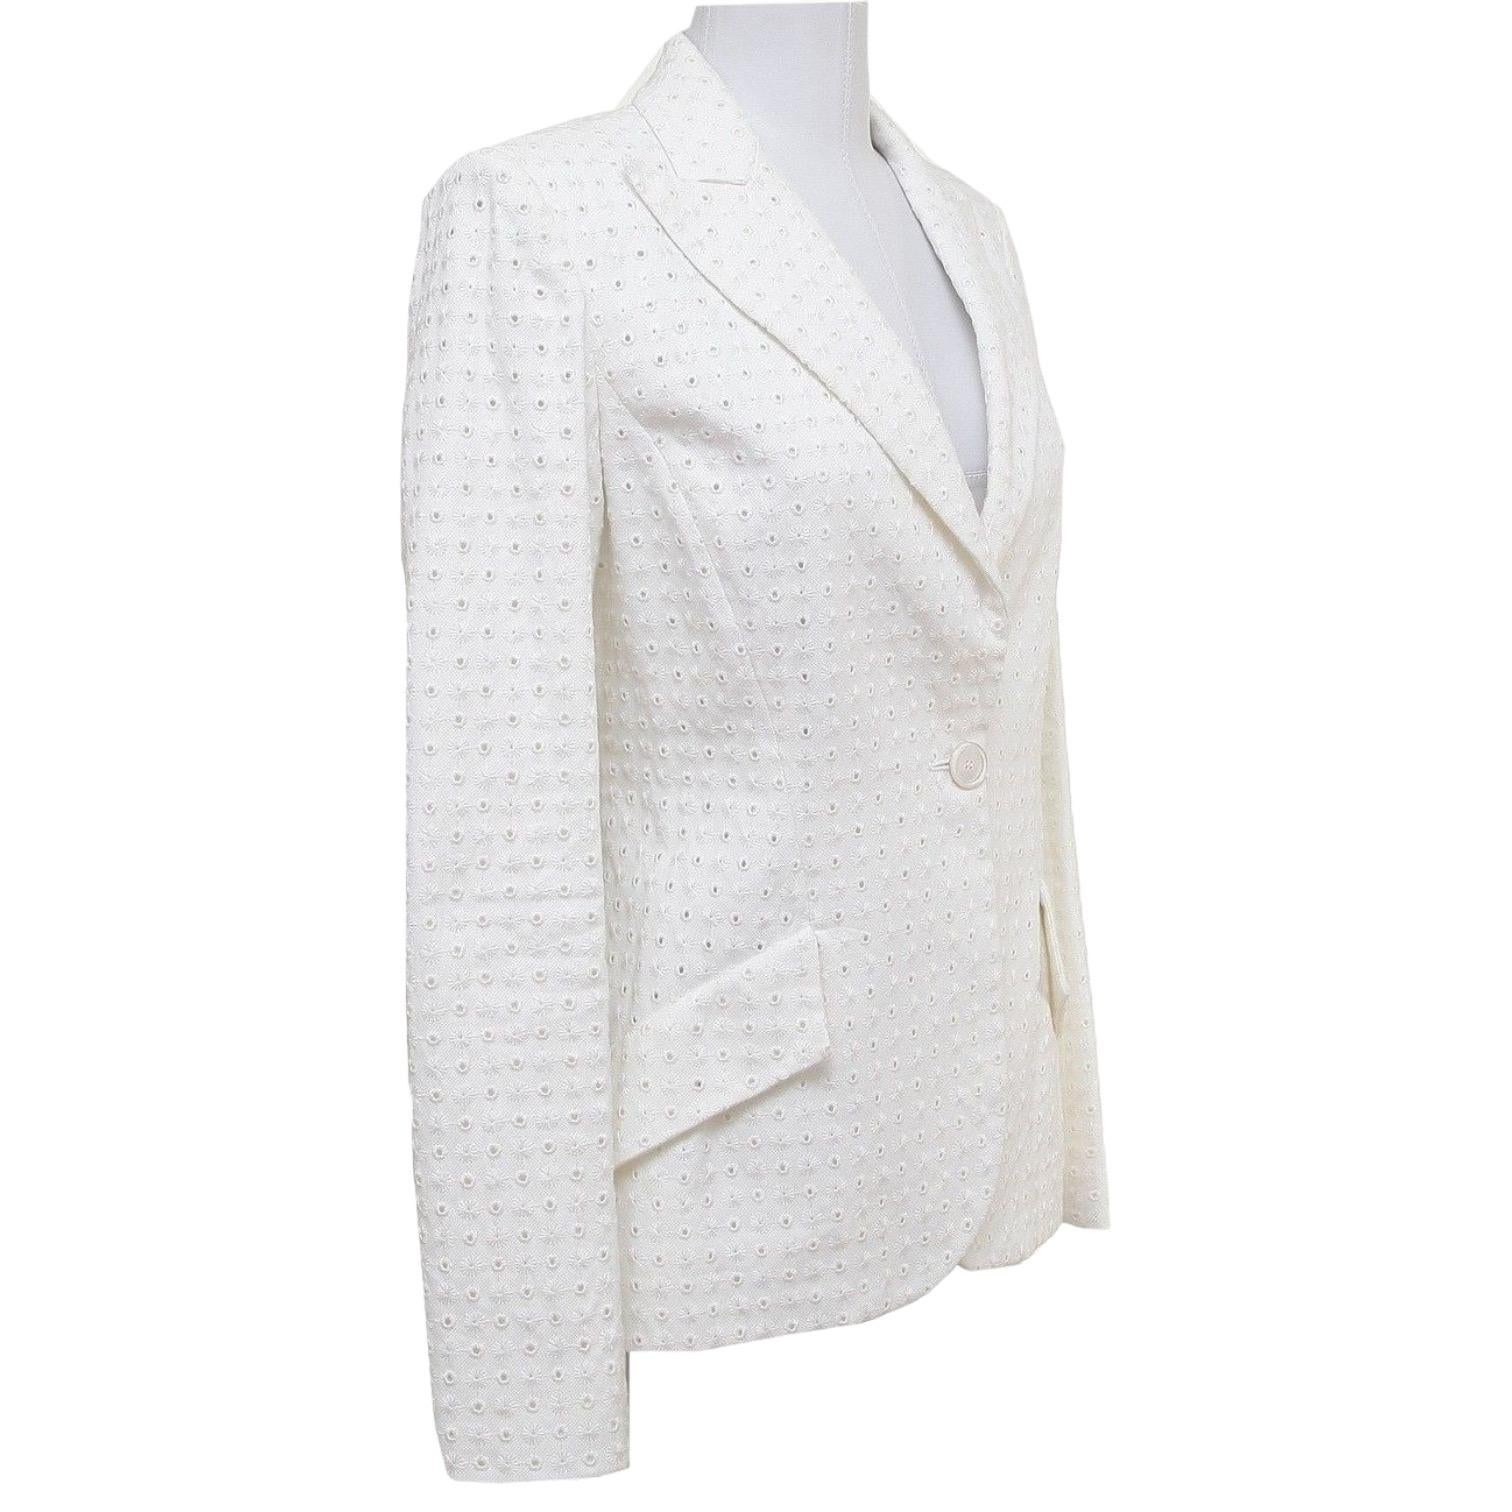 GUARANTEED AUTHENTIC VALENTINO TIMELESS WHITE JACKET

• Size: 4
• Material: 66% Cotton, 34% Viscose
• Design:
  - Sensational white 1 button single breast eyelet jacket.
  - Timeless size lapel and 2 front flap pockets at hip.
  - Lightly padded